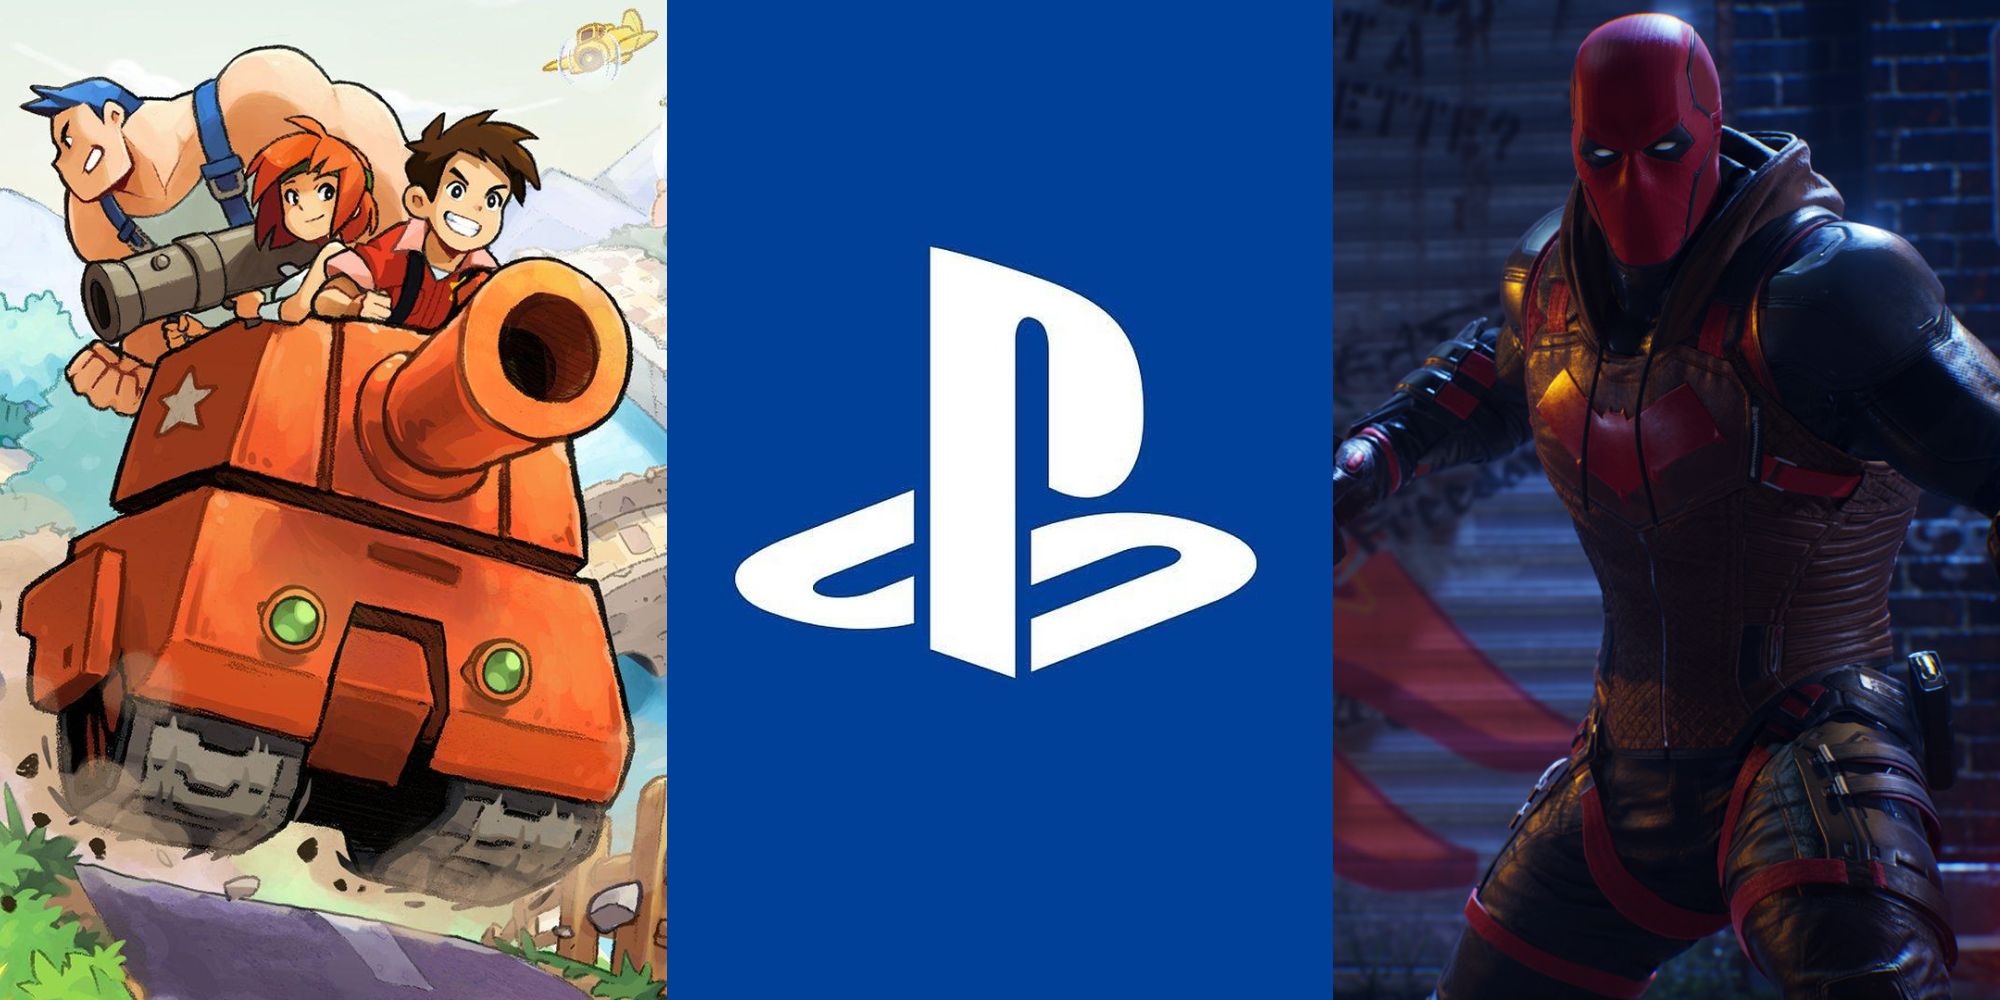 Characters from Advance Wars in a tank, a PlayStation logo, and a character from Gotham Knights